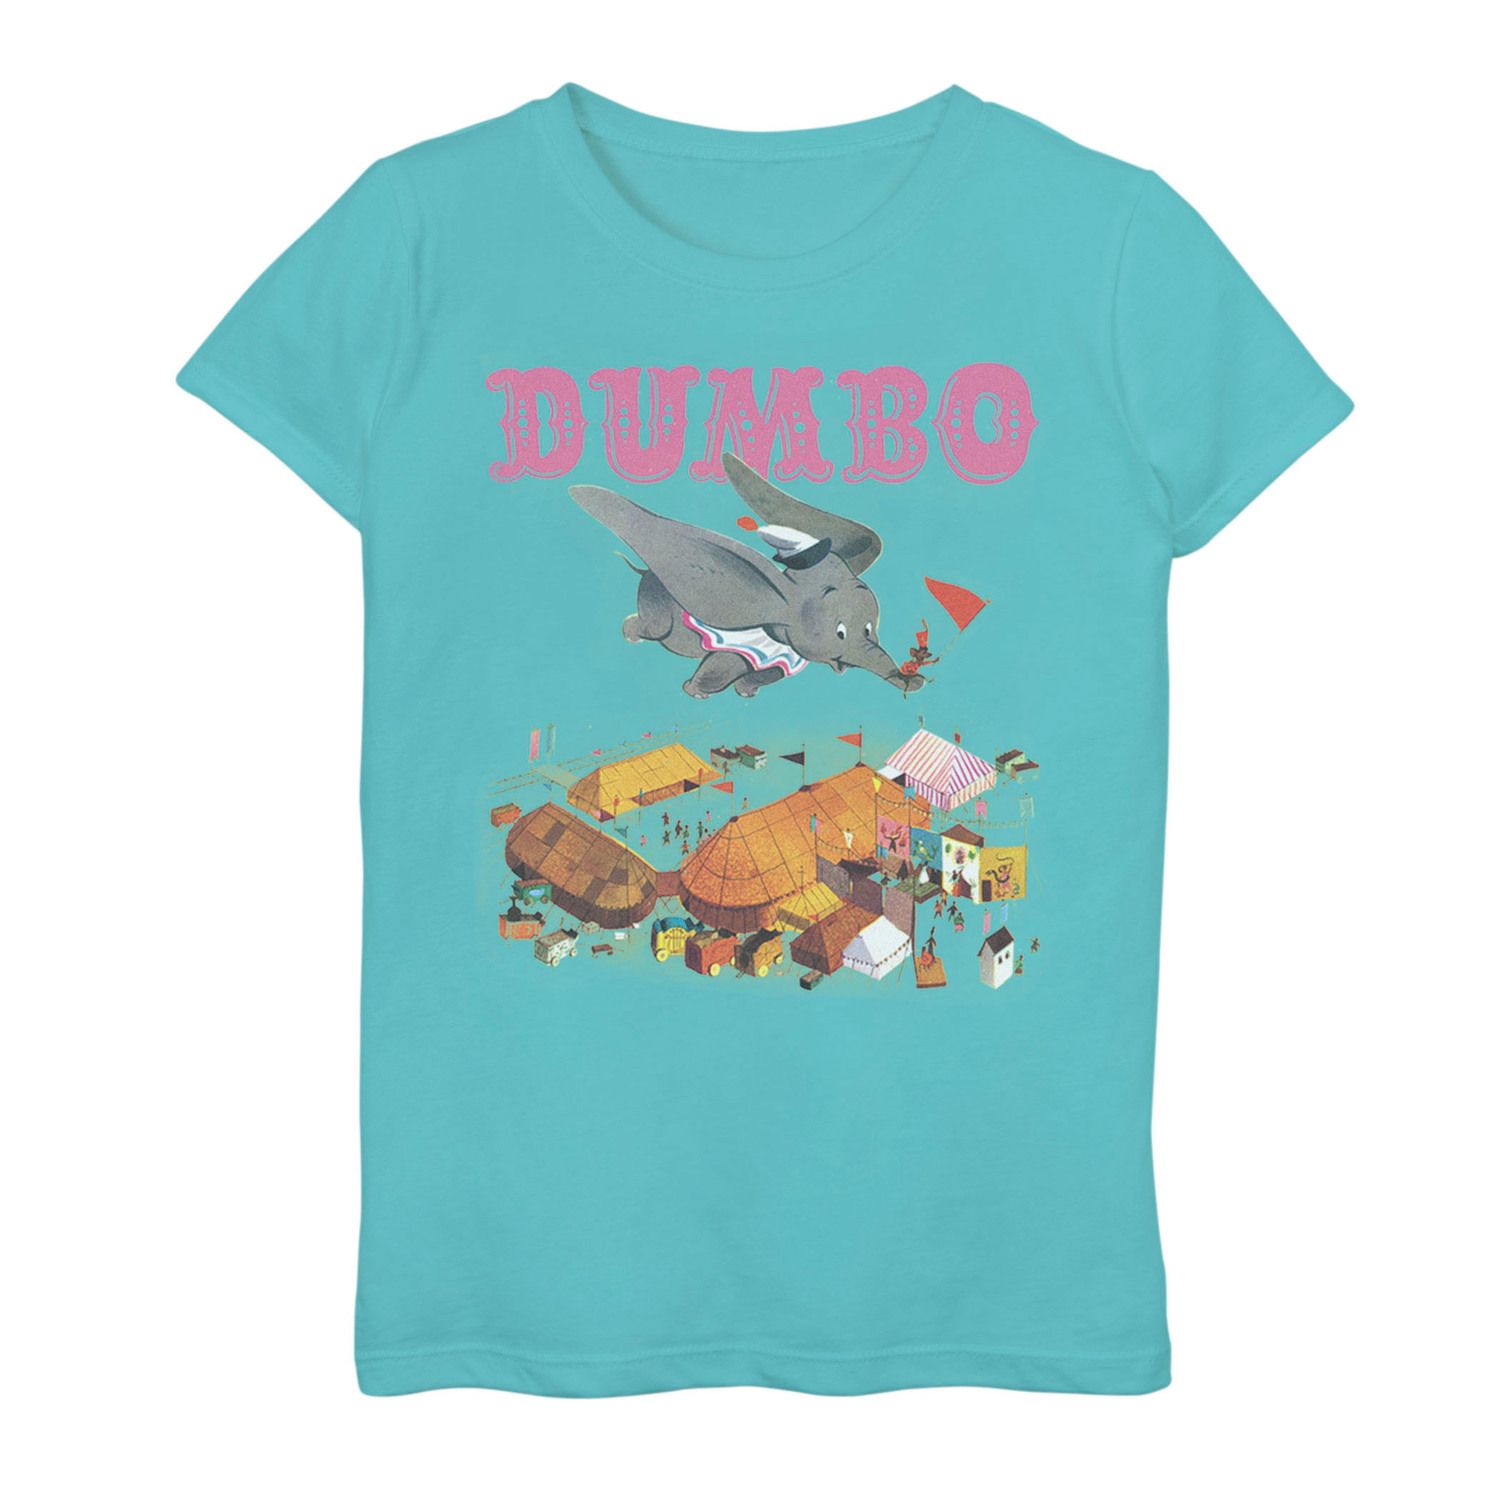 Image for Disney 's Dumbo Girls 7-16 Vintage Story Book Style Flying Portrait Graphic Tee at Kohl's.